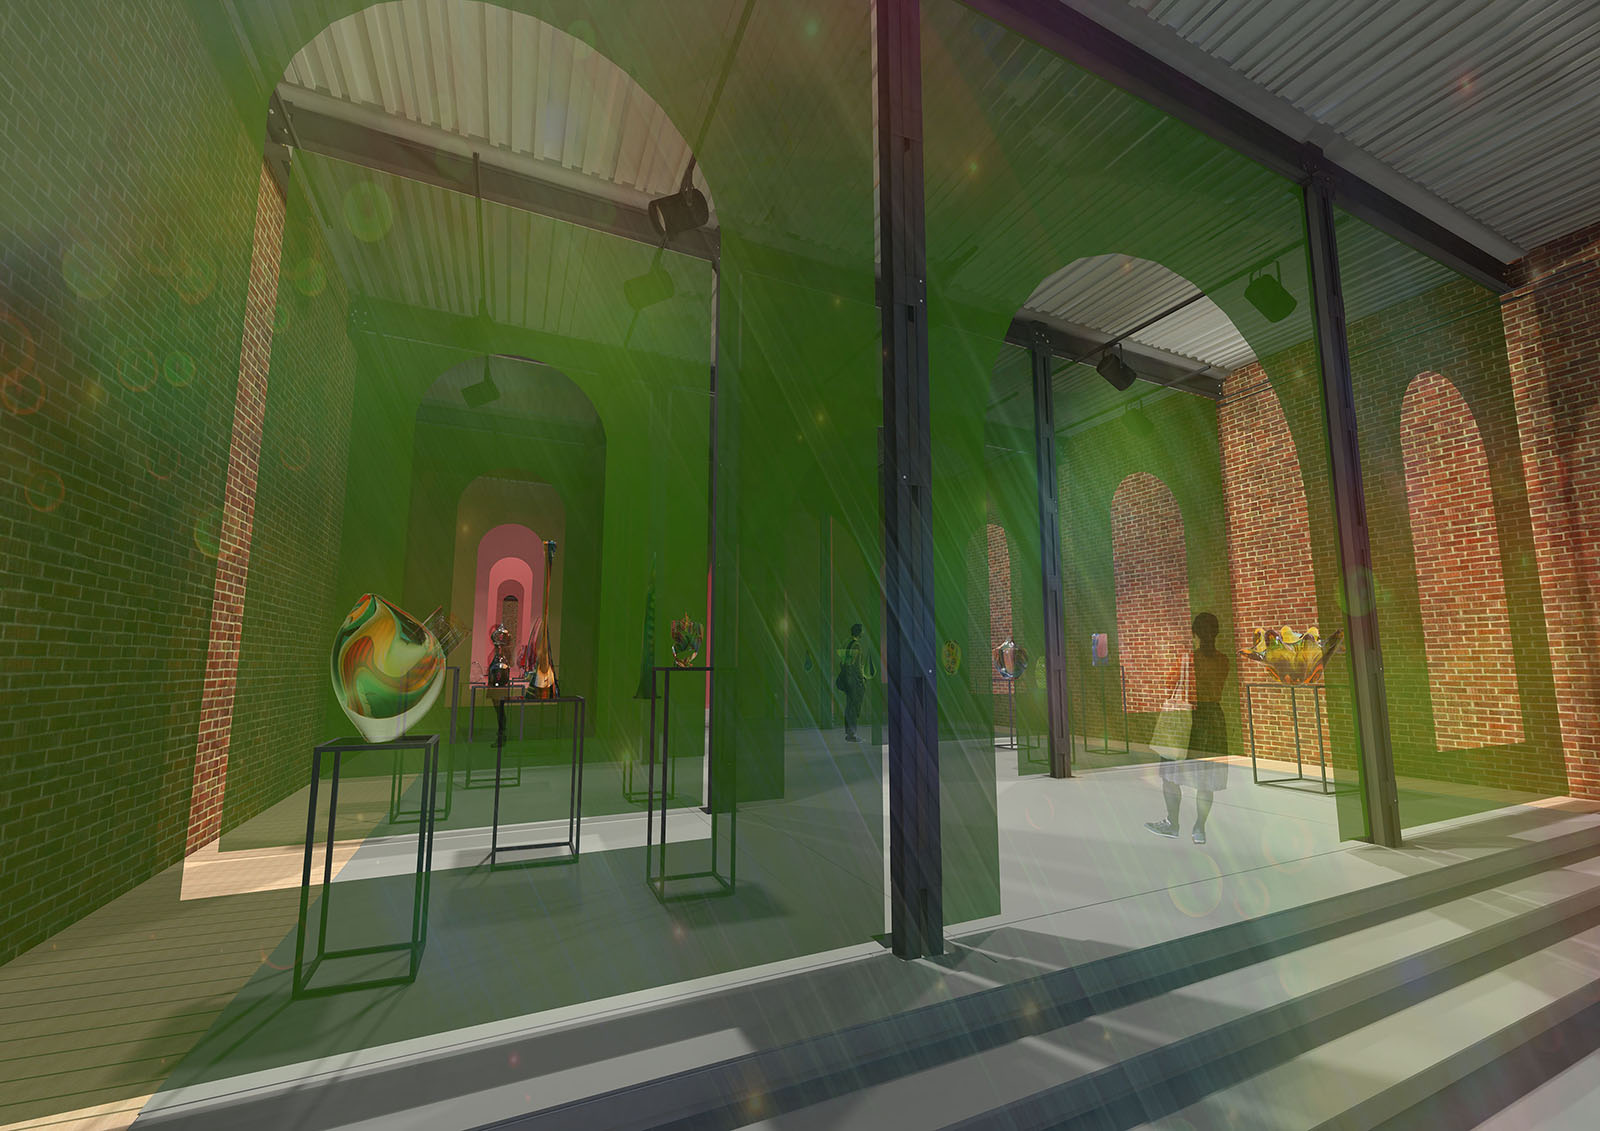 Visualisation of the transparent green section of the UAE pavillion